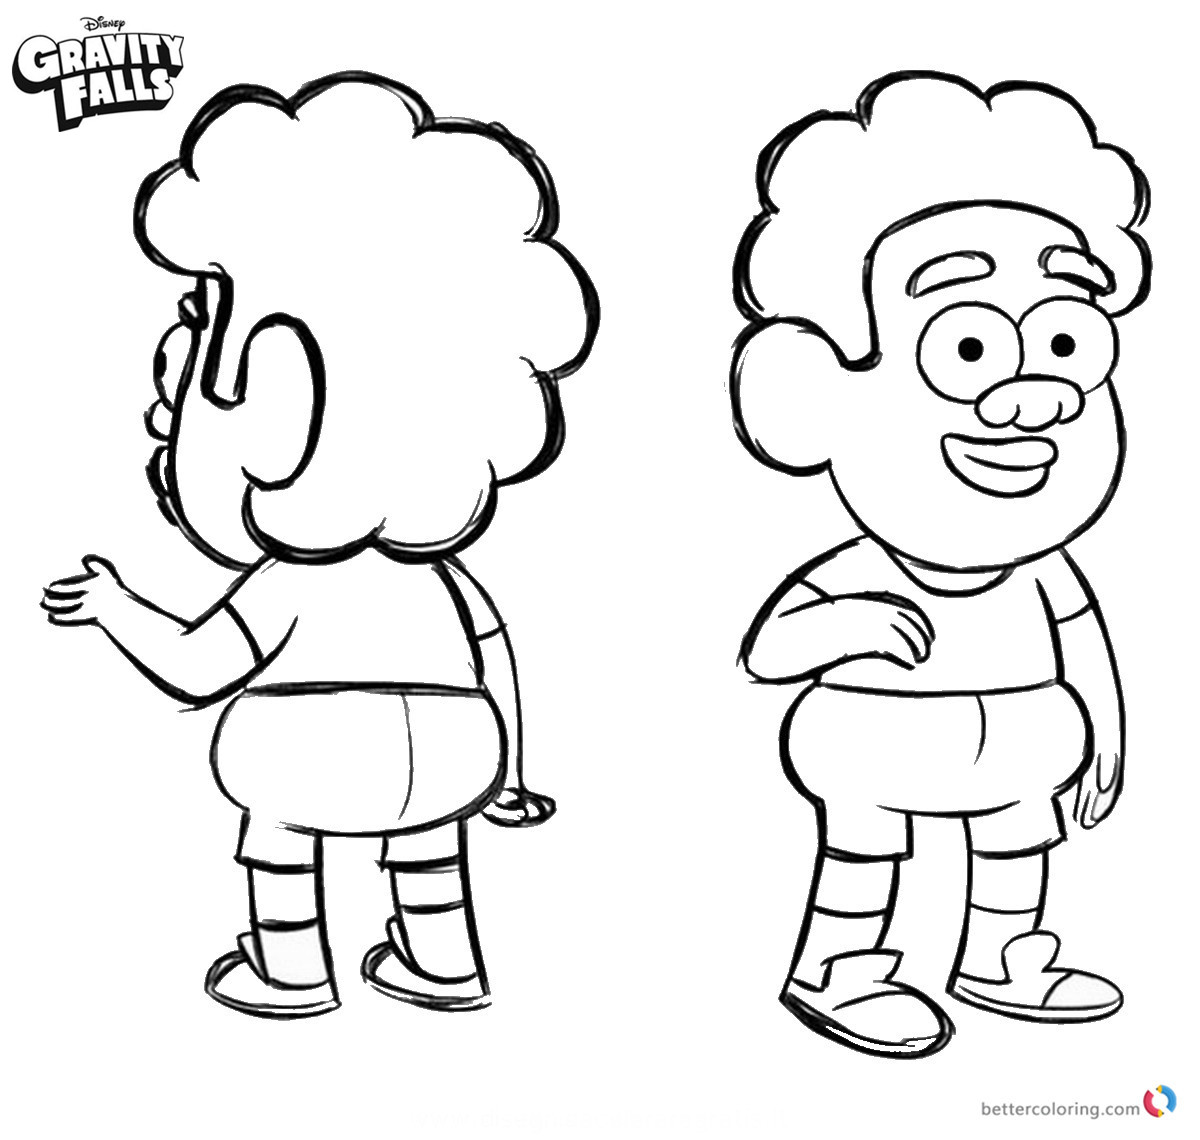 Gravity Falls coloring pages Tyler printable